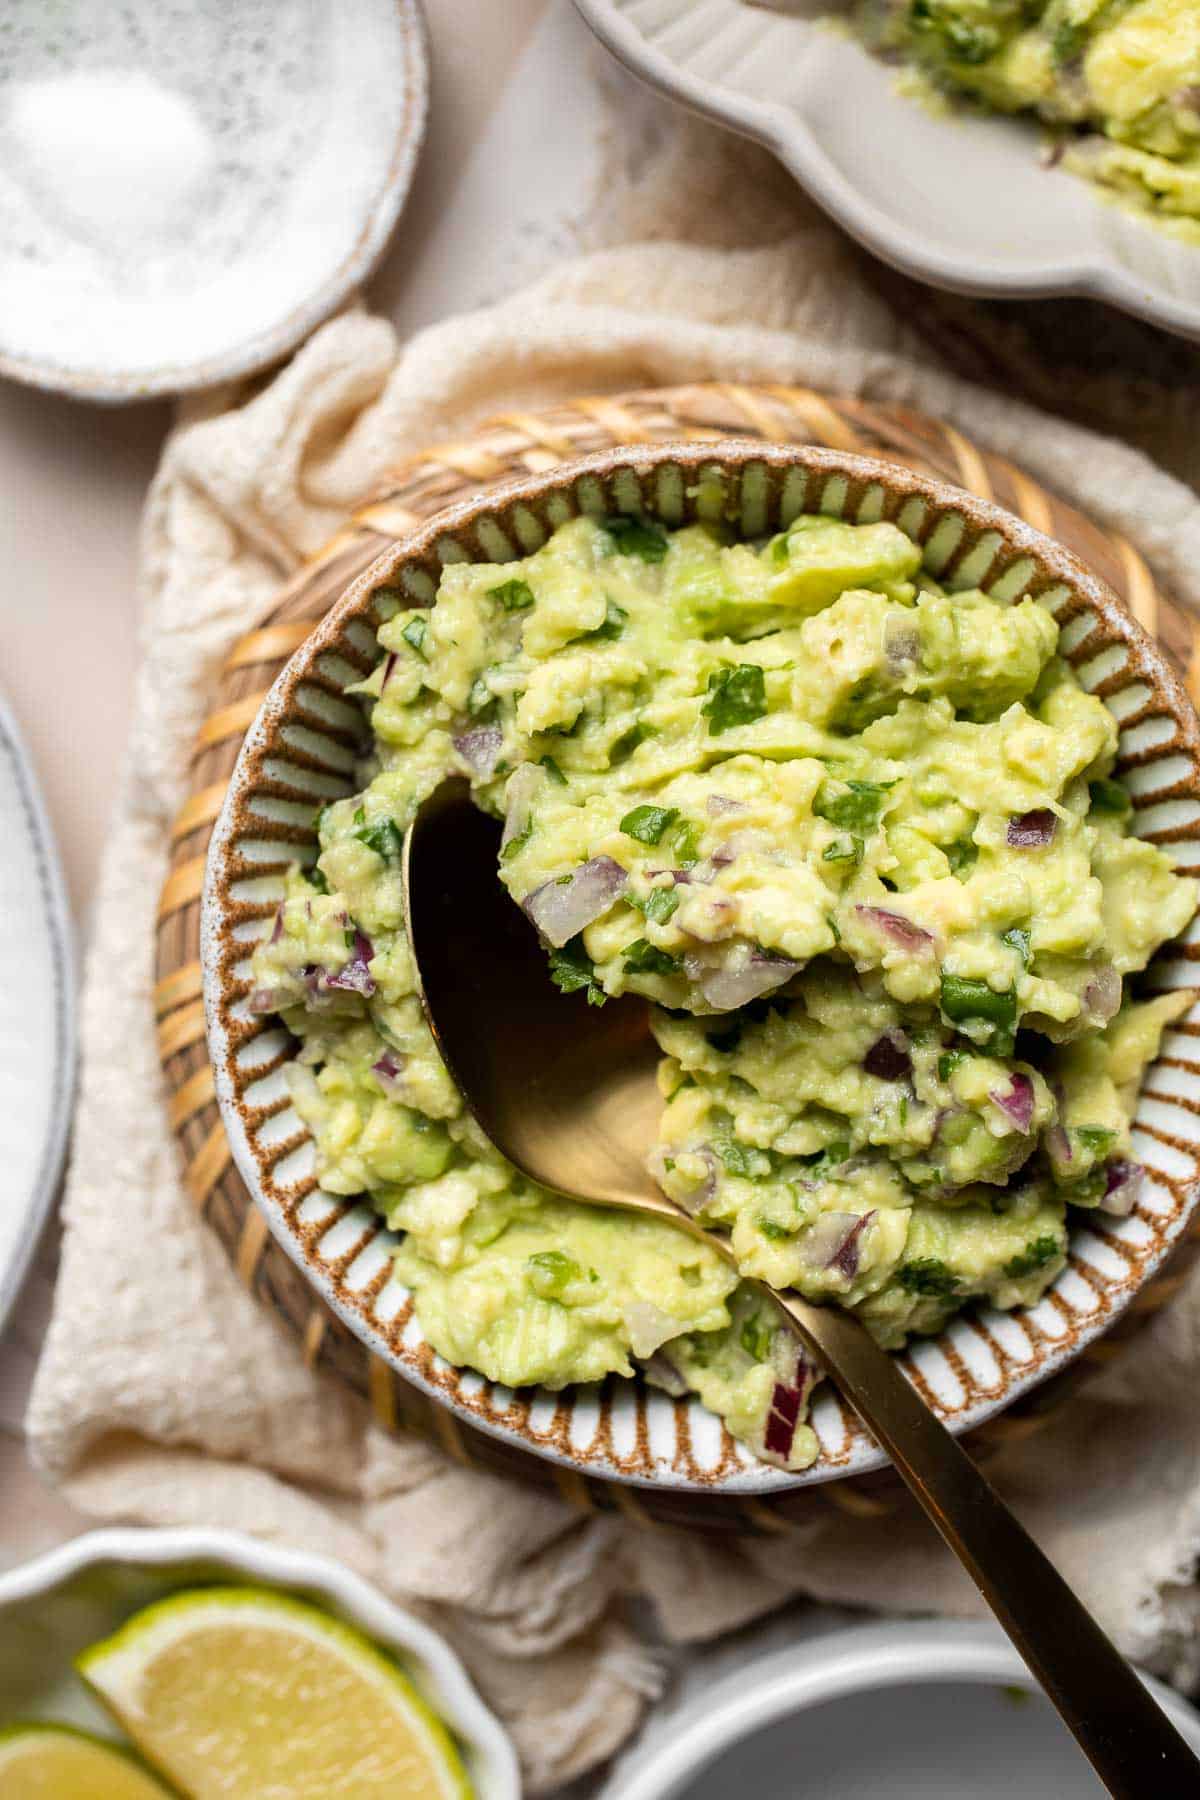 This authentic Guacamole recipe is quick and easy to make at home with just a few simple ingredients and 5 minutes of time. It's fresh and flavorful. | aheadofthyme.com